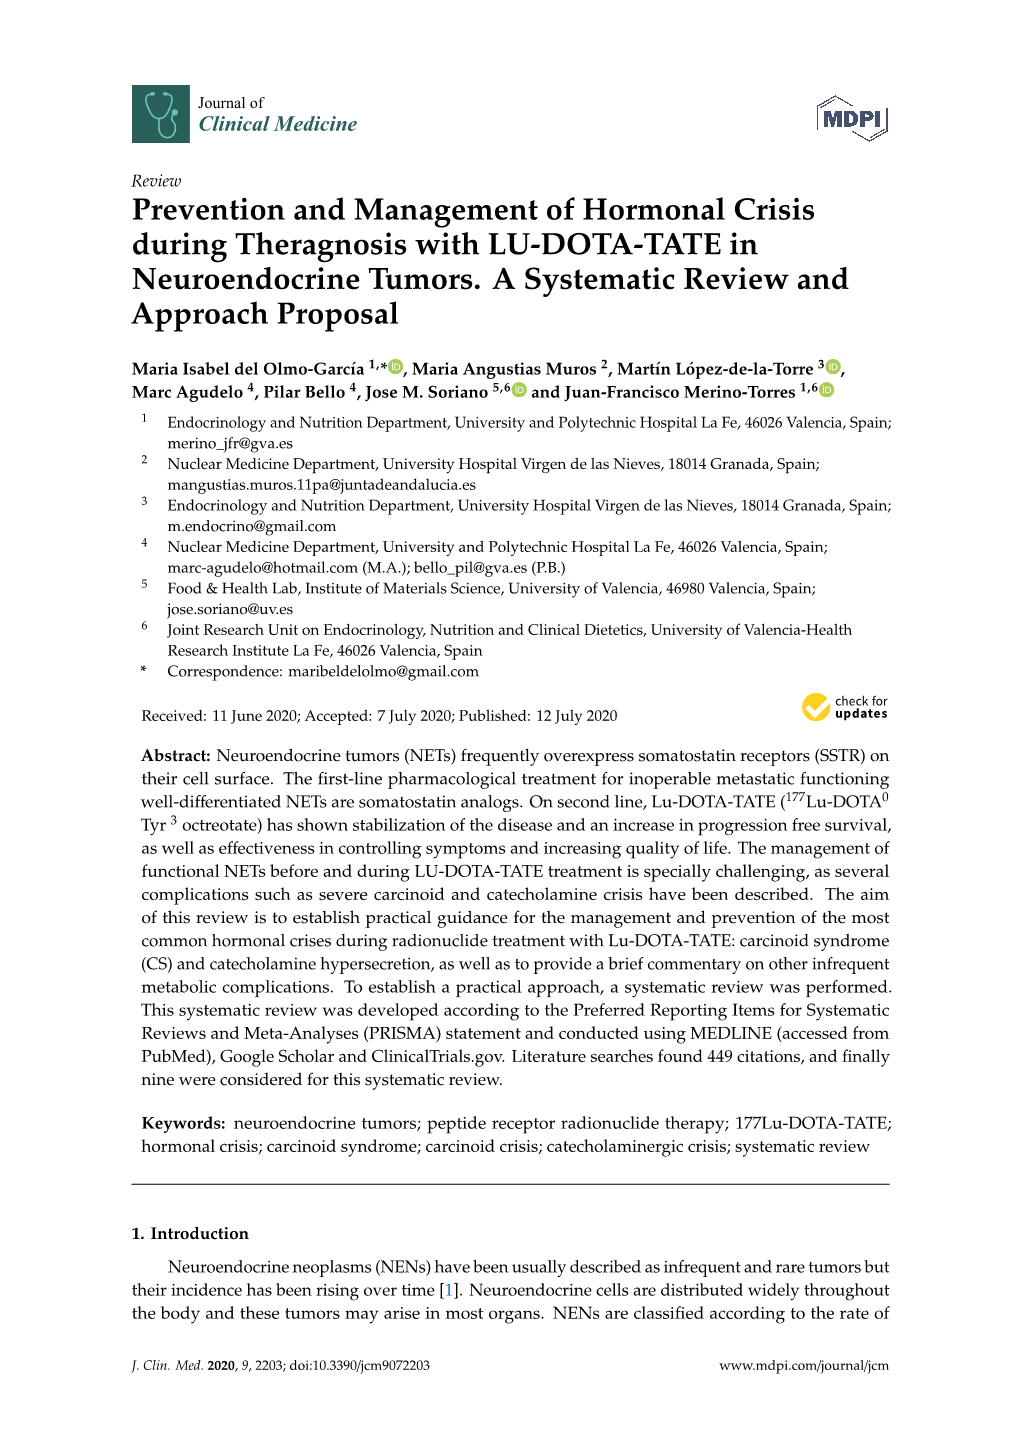 Prevention and Management of Hormonal Crisis During Theragnosis with LU-DOTA-TATE in Neuroendocrine Tumors